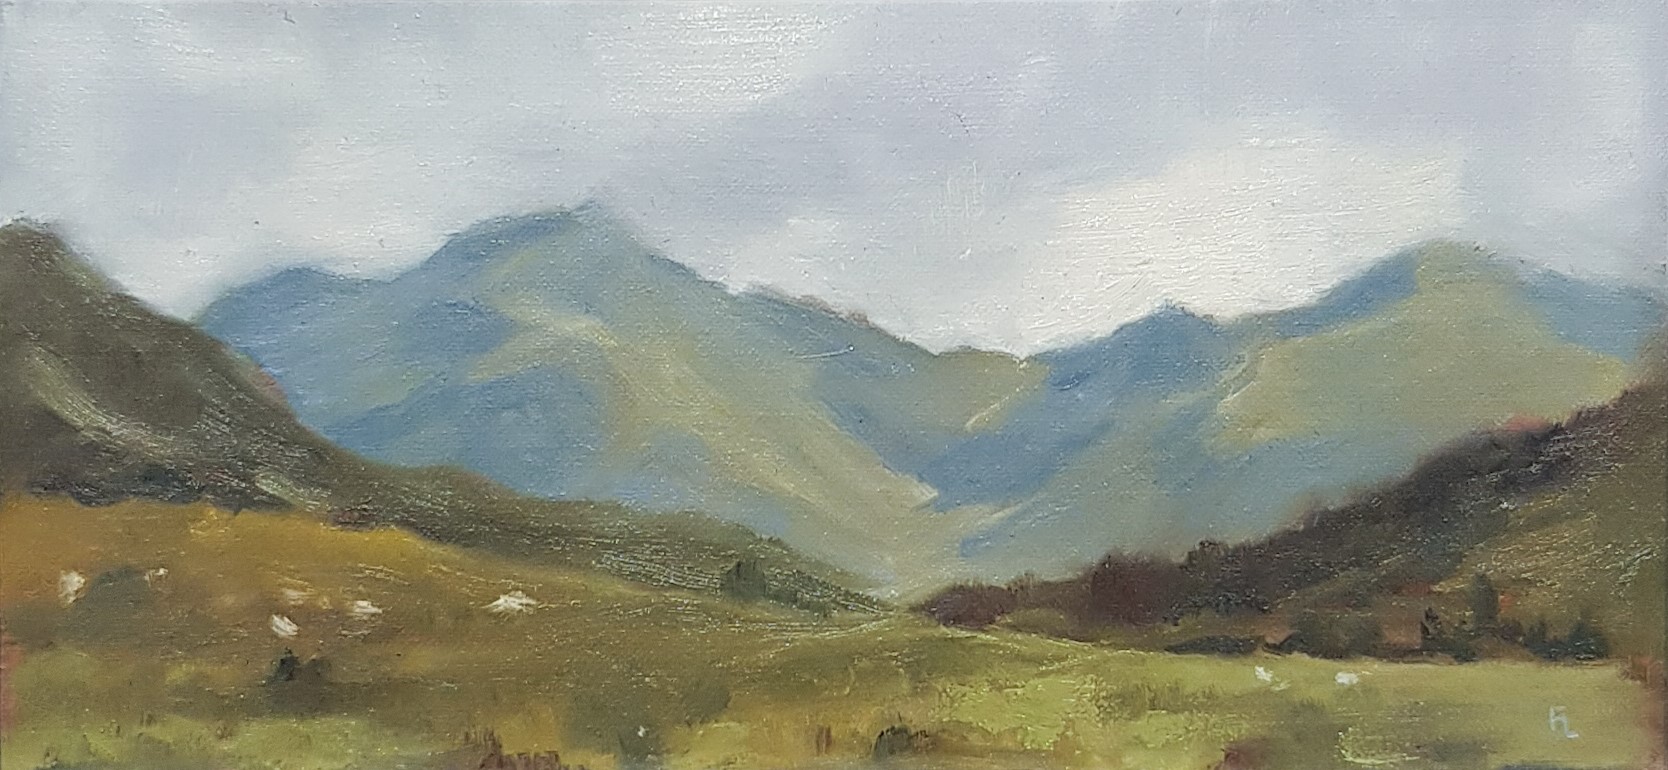 'View Out to The Mamores, Glen Nevis' by artist Fiona Longley